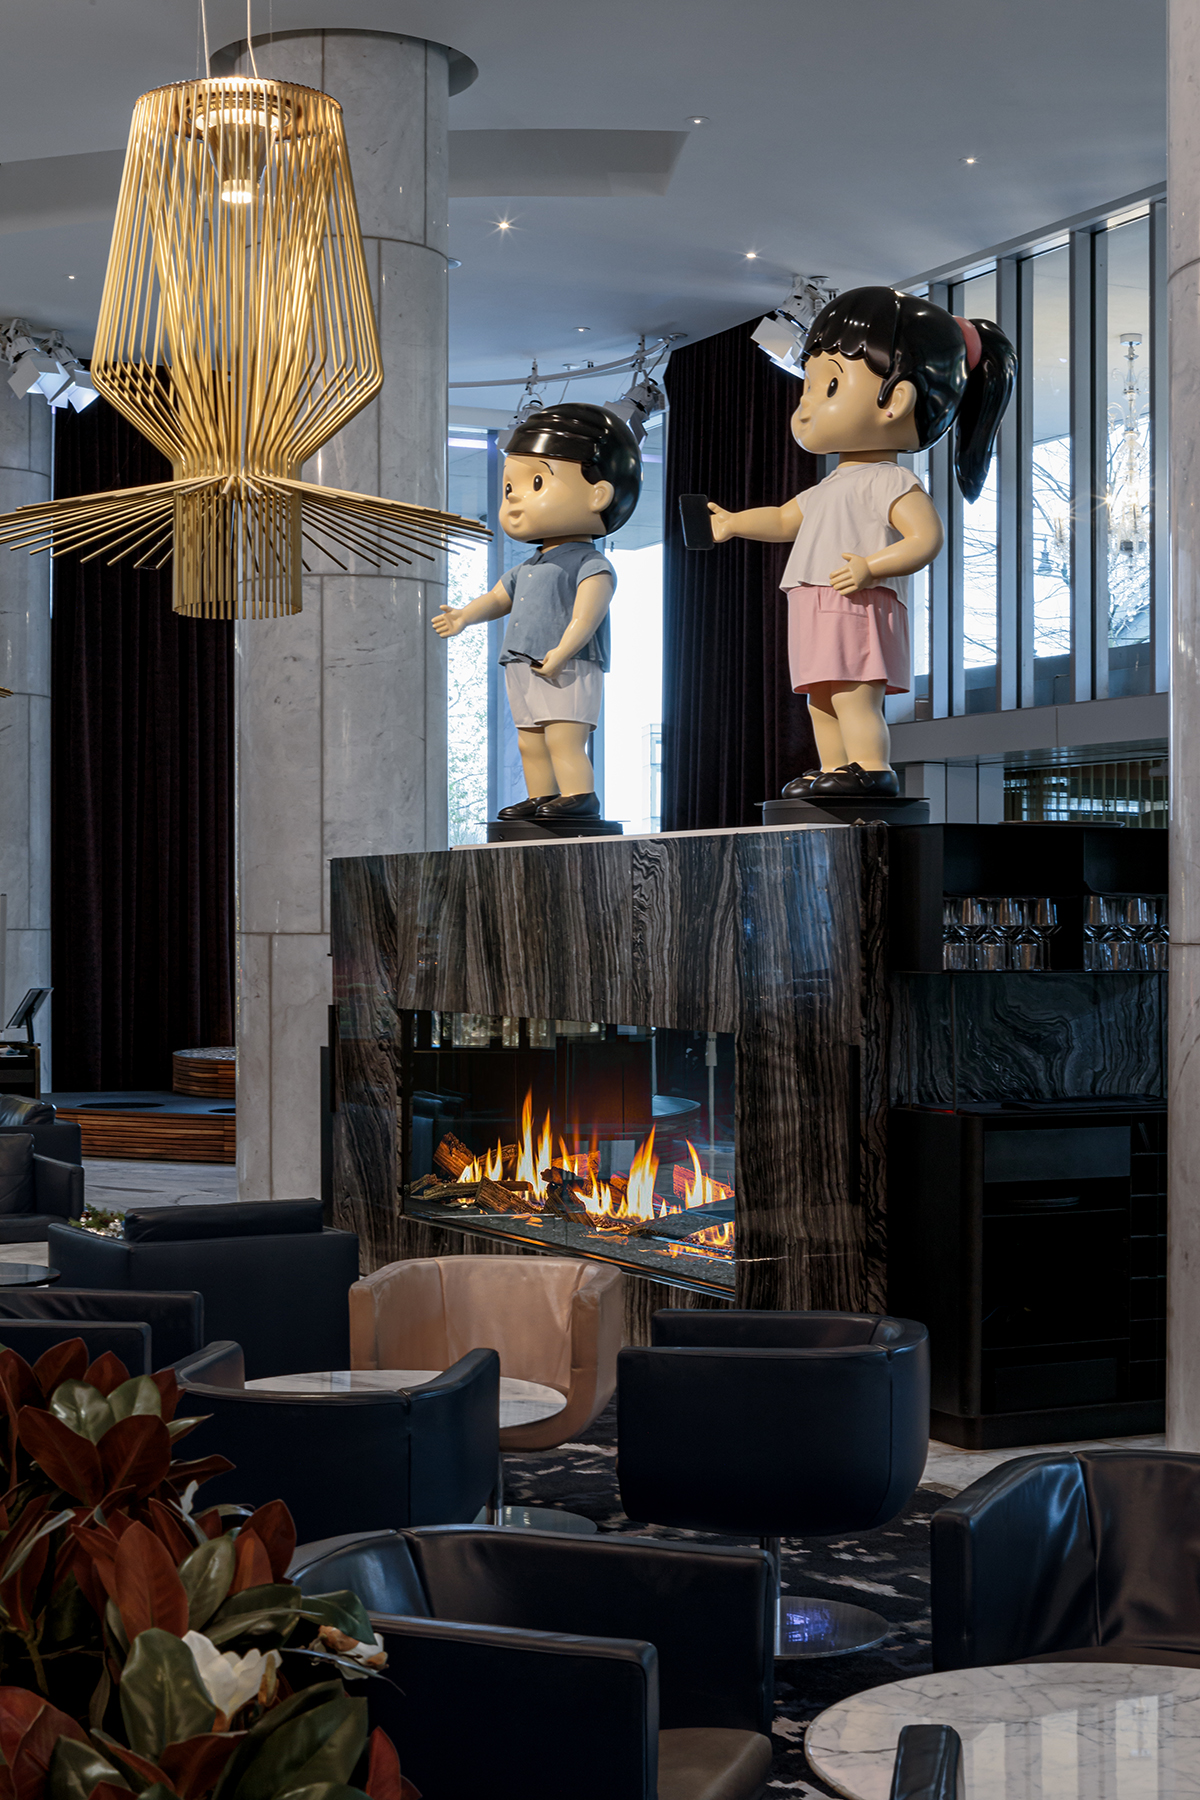 A fireplace with large sculptures of children on top of it